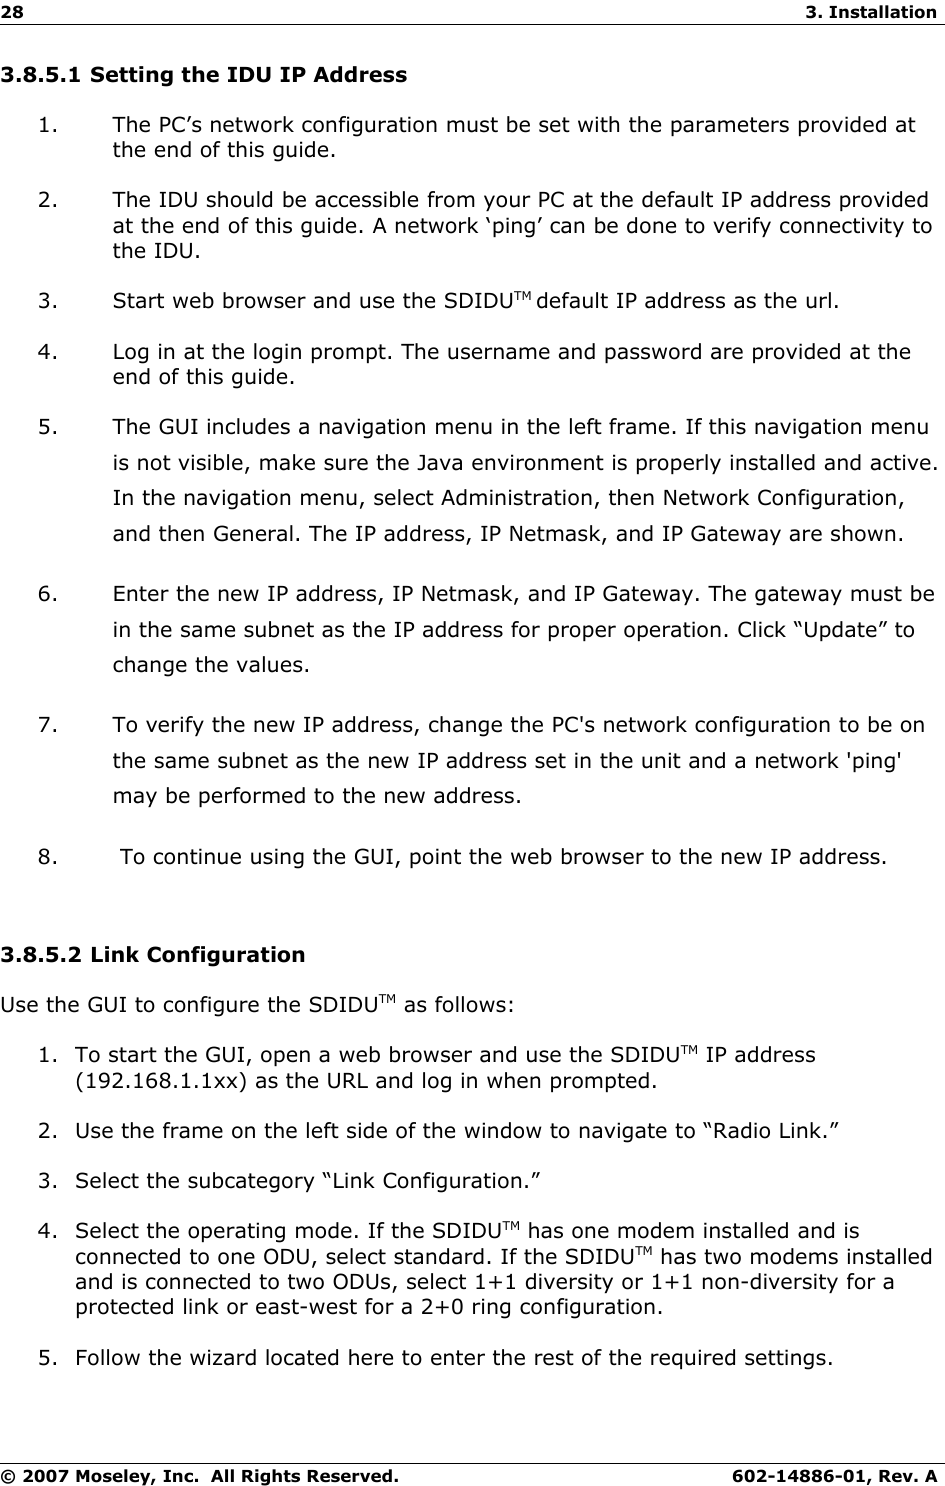 28 3. Installation3.8.5.1 Setting the IDU IP Address1. The PC’s network configuration must be set with the parameters provided at the end of this guide. 2. The IDU should be accessible from your PC at the default IP address provided at the end of this guide. A network ‘ping’ can be done to verify connectivity to the IDU. 3. Start web browser and use the SDIDUTM default IP address as the url. 4. Log in at the login prompt. The username and password are provided at the end of this guide. 5. The GUI includes a navigation menu in the left frame. If this navigation menu is not visible, make sure the Java environment is properly installed and active. In the navigation menu, select Administration, then Network Configuration, and then General. The IP address, IP Netmask, and IP Gateway are shown. 6. Enter the new IP address, IP Netmask, and IP Gateway. The gateway must be in the same subnet as the IP address for proper operation. Click “Update” to change the values. 7. To verify the new IP address, change the PC&apos;s network configuration to be on the same subnet as the new IP address set in the unit and a network &apos;ping&apos; may be performed to the new address. 8.  To continue using the GUI, point the web browser to the new IP address. 3.8.5.2 Link ConfigurationUse the GUI to configure the SDIDUTM as follows:1. To start the GUI, open a web browser and use the SDIDUTM IP address (192.168.1.1xx) as the URL and log in when prompted.2. Use the frame on the left side of the window to navigate to “Radio Link.”3. Select the subcategory “Link Configuration.”4. Select the operating mode. If the SDIDUTM has one modem installed and is connected to one ODU, select standard. If the SDIDUTM has two modems installed and is connected to two ODUs, select 1+1 diversity or 1+1 non-diversity for a protected link or east-west for a 2+0 ring configuration.5. Follow the wizard located here to enter the rest of the required settings.© 2007 Moseley, Inc.  All Rights Reserved. 602-14886-01, Rev. A